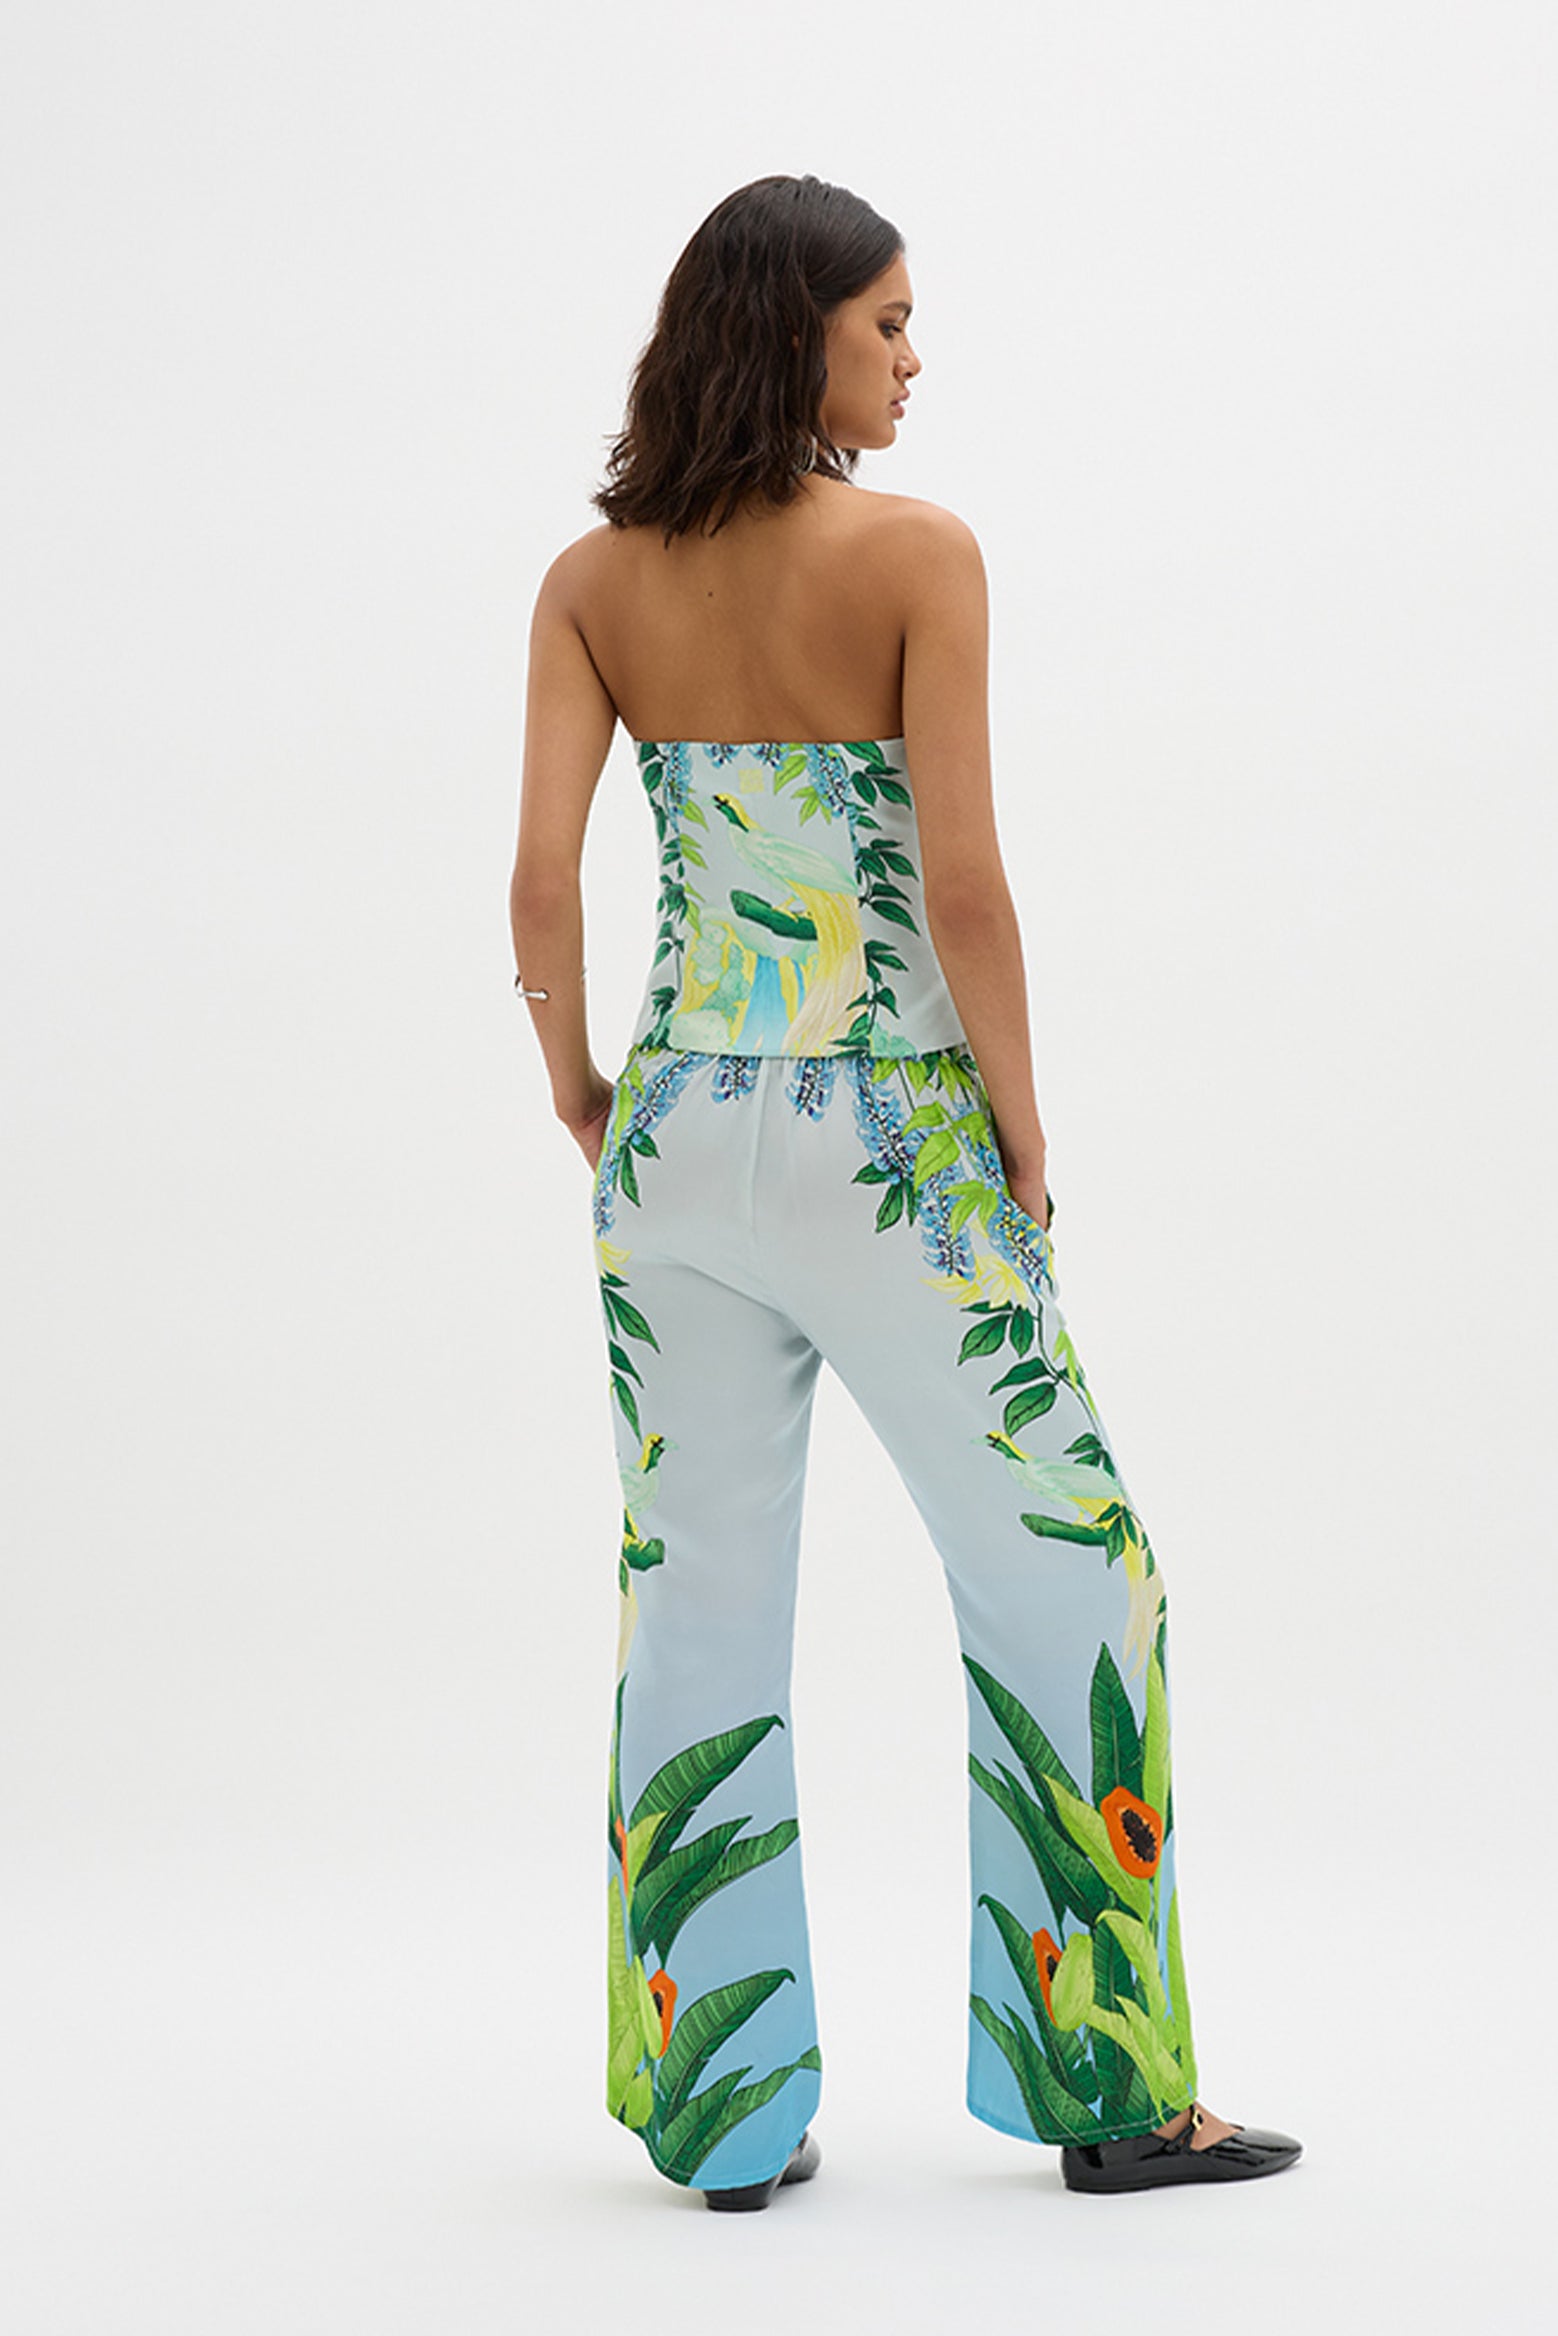 Muma World Eden Illustrated Pant in Blue available at The New Trend Australia.